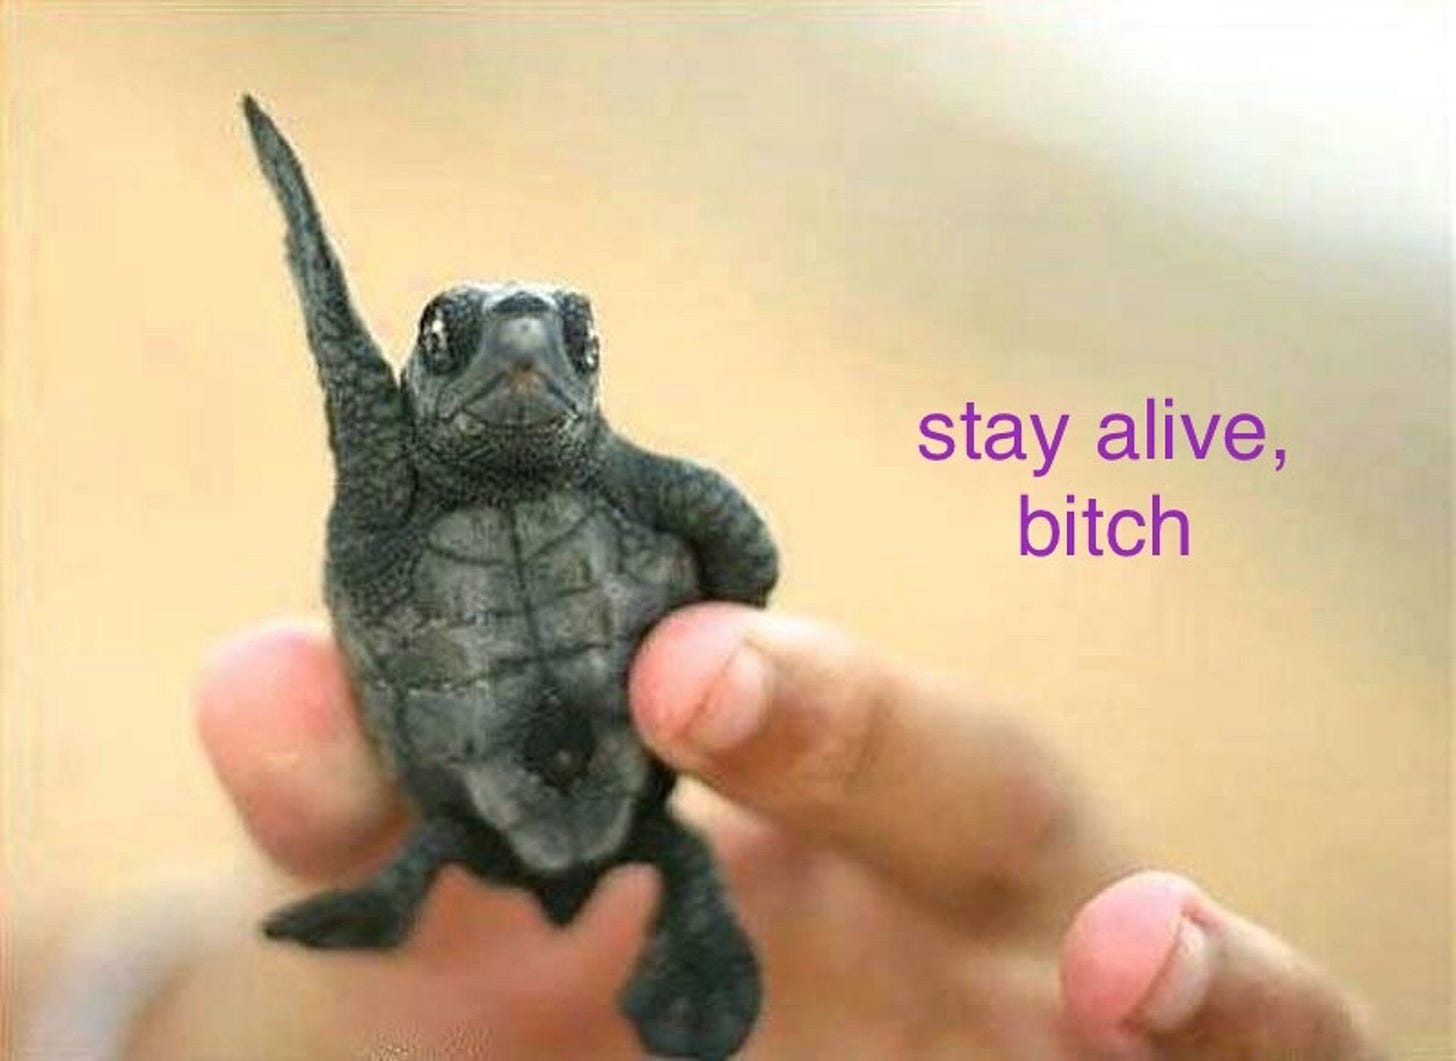 A picture of a tiny turtle or tortoise being held up between two human fingers. The animal holds up one of its front limbs, as if waving. The text added to the image says "Stay alive, bitch"